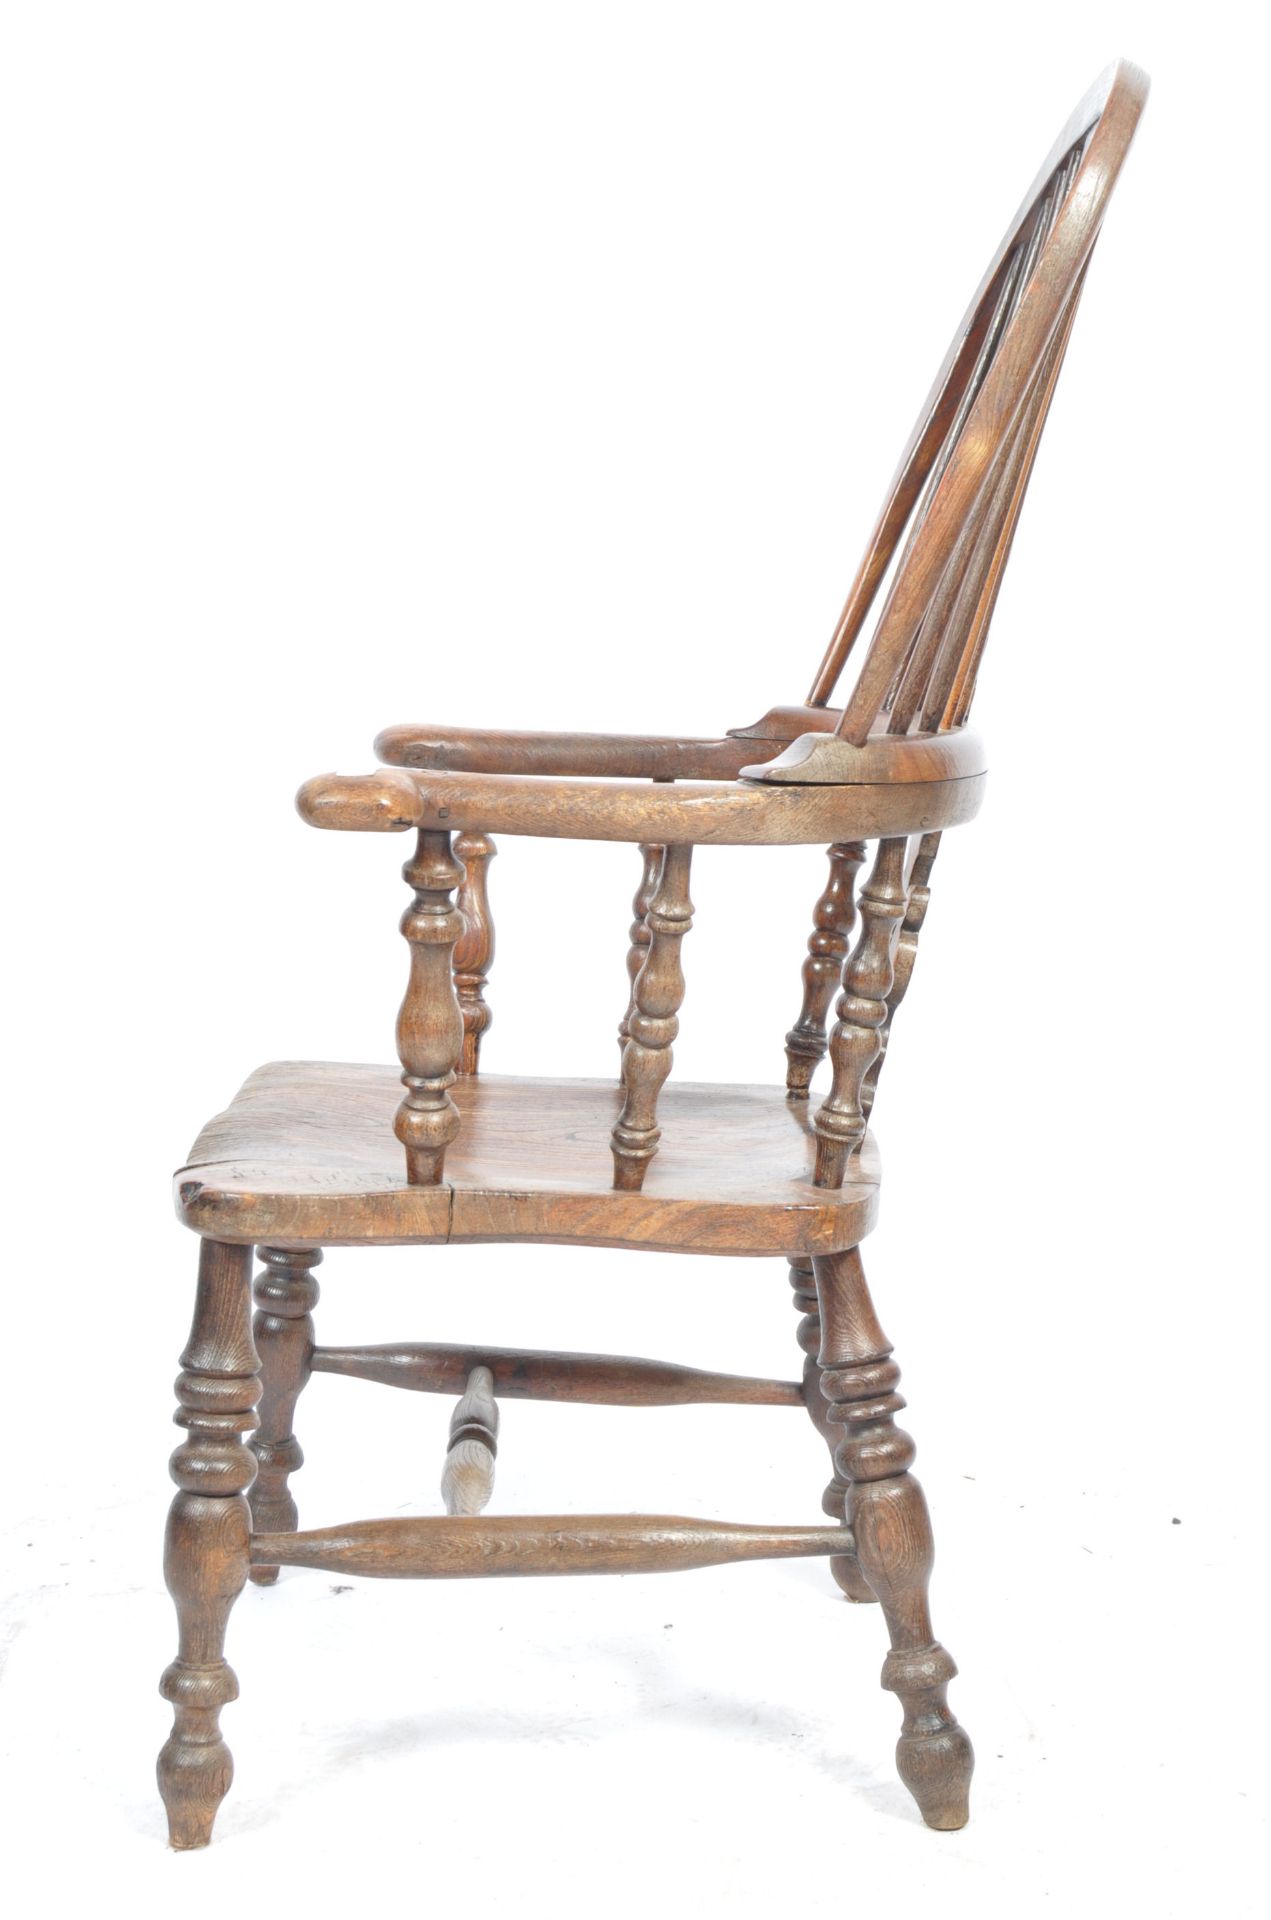 19TH CENTURY ENGLISH ANTIQUE YEW WOOD WINDSOR CARVER CHAIR - Image 3 of 6